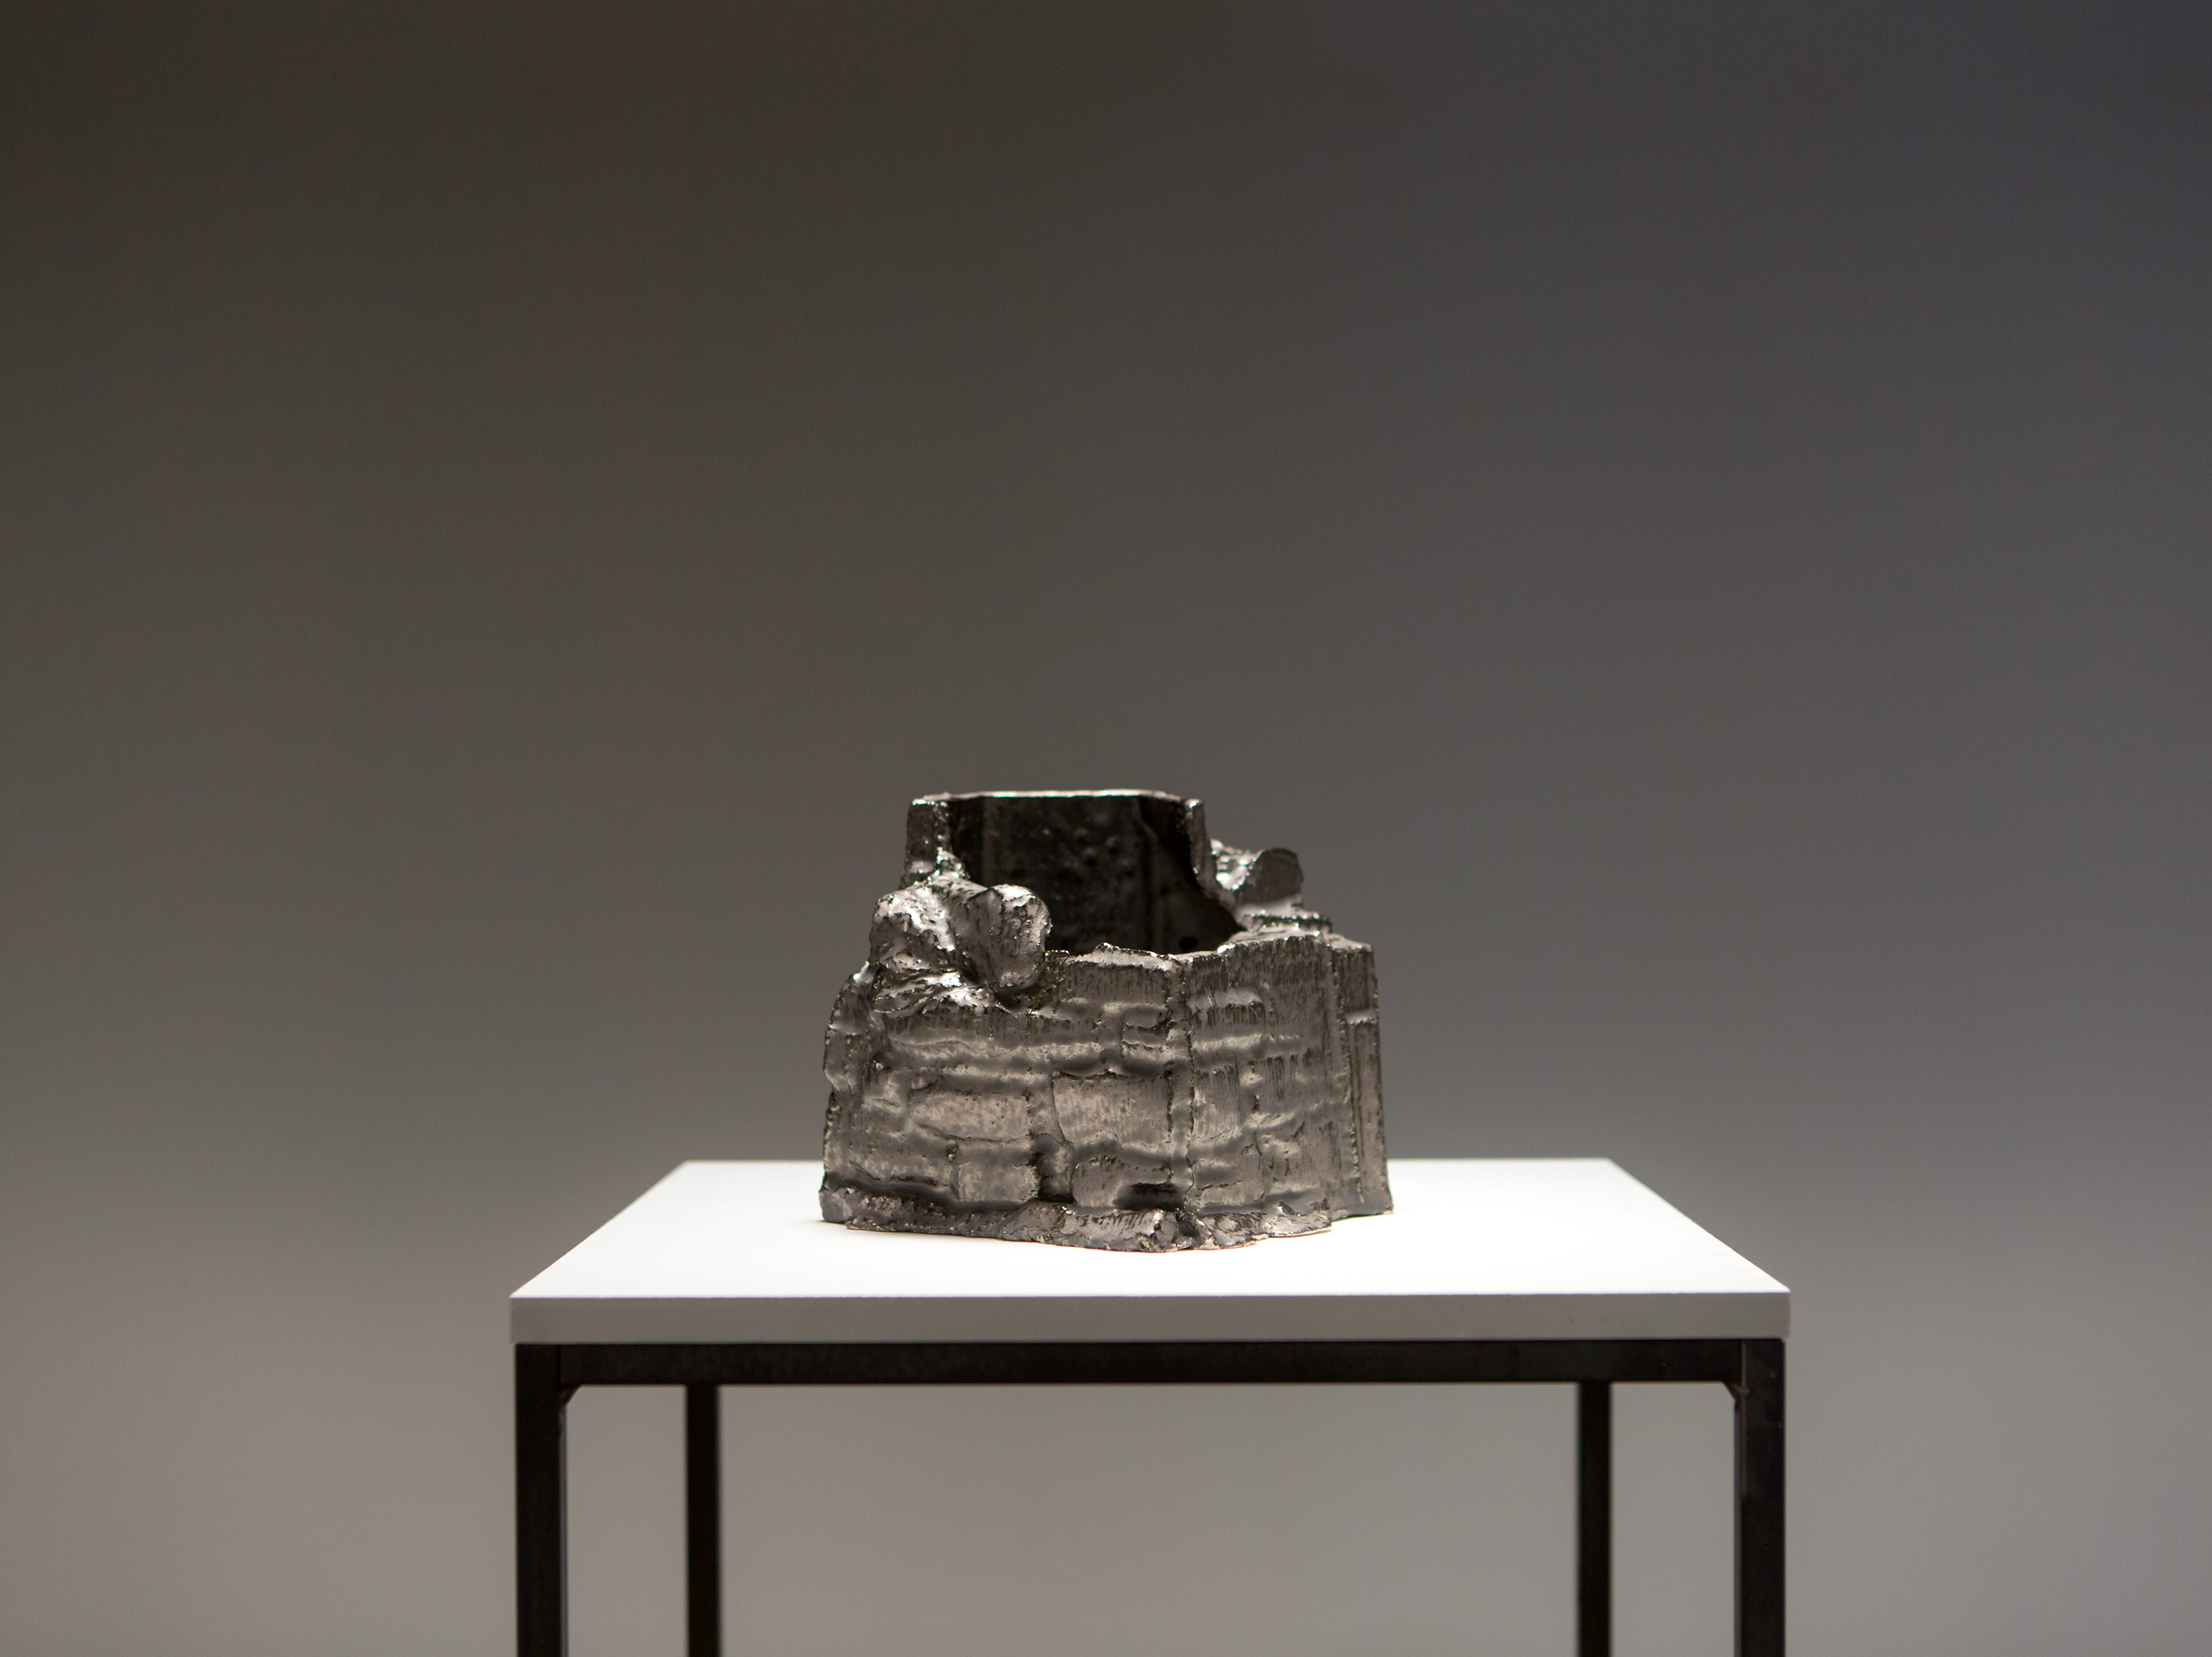 A ceramic form showcase on a plinth. The ceramic is coated with metallic silver glaze.